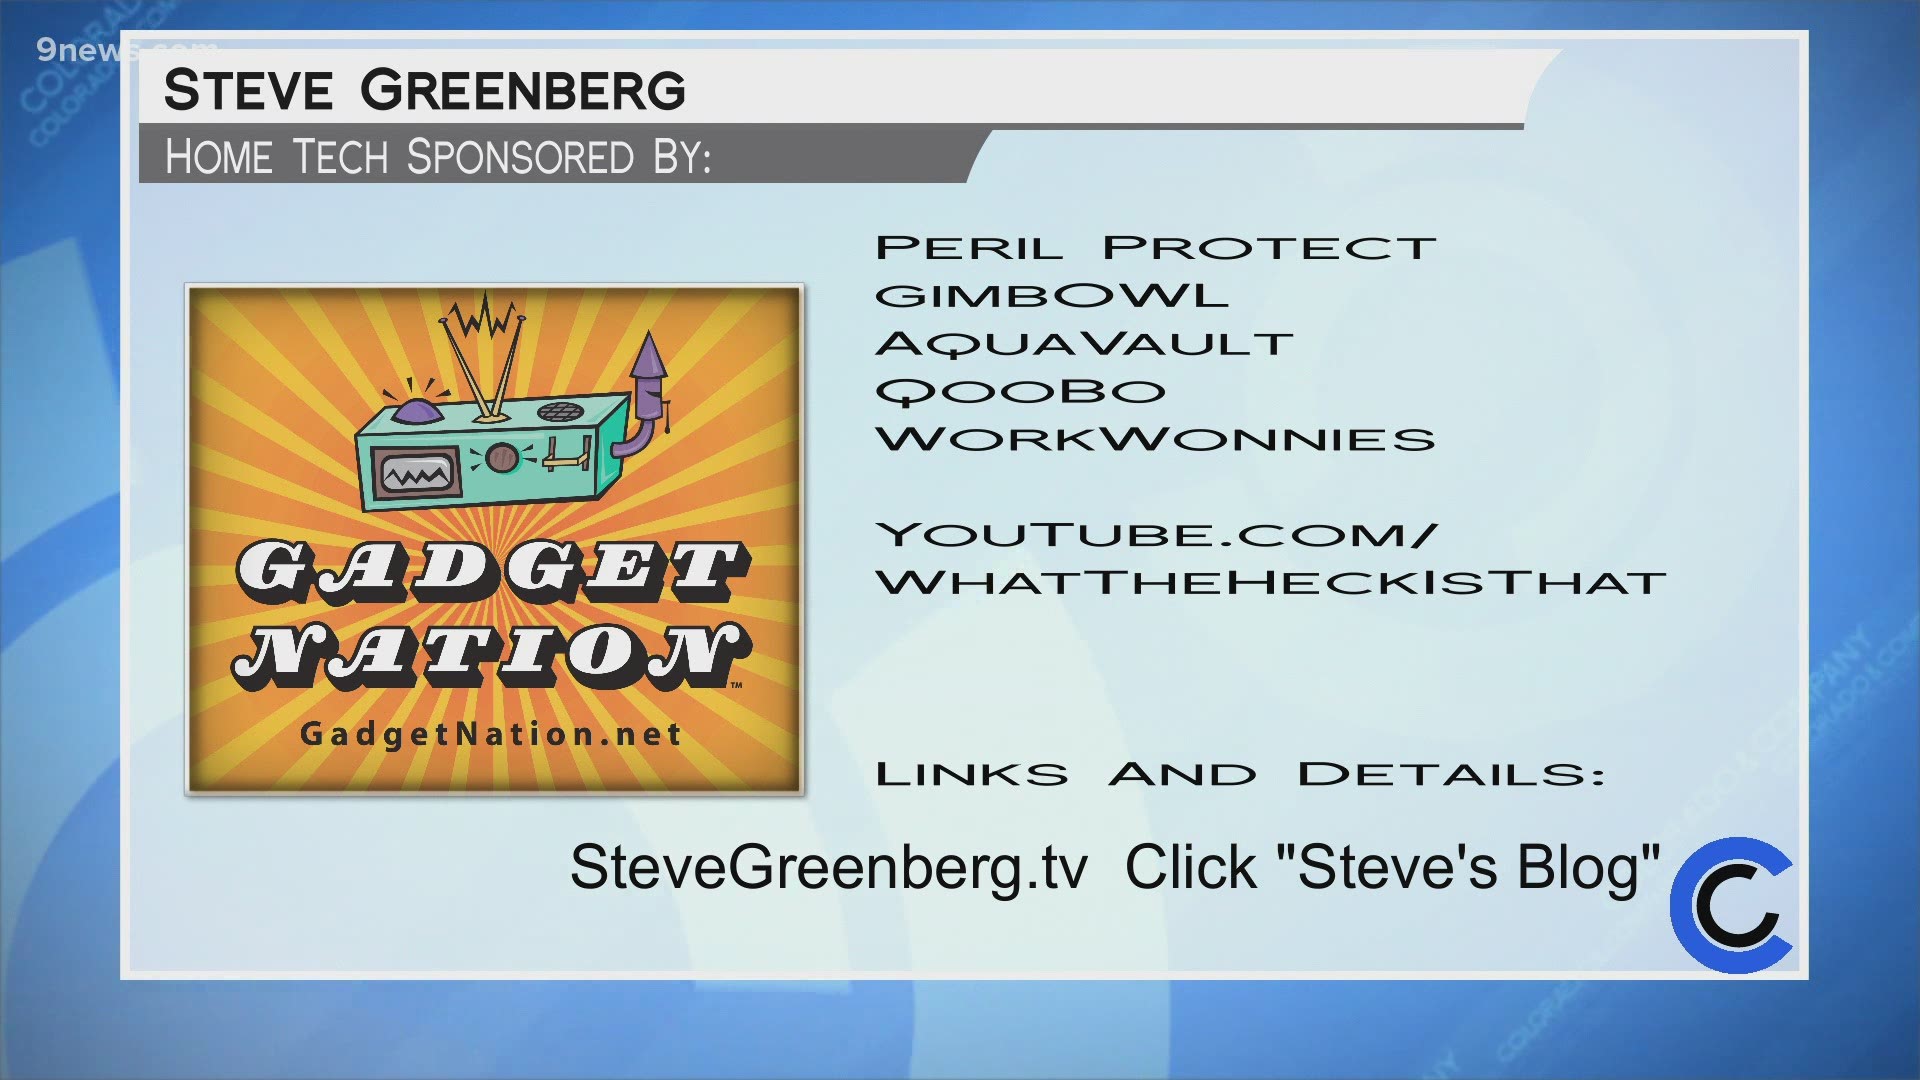 Find more about Steve and some cool new tech at SteveGreenberg.tv.